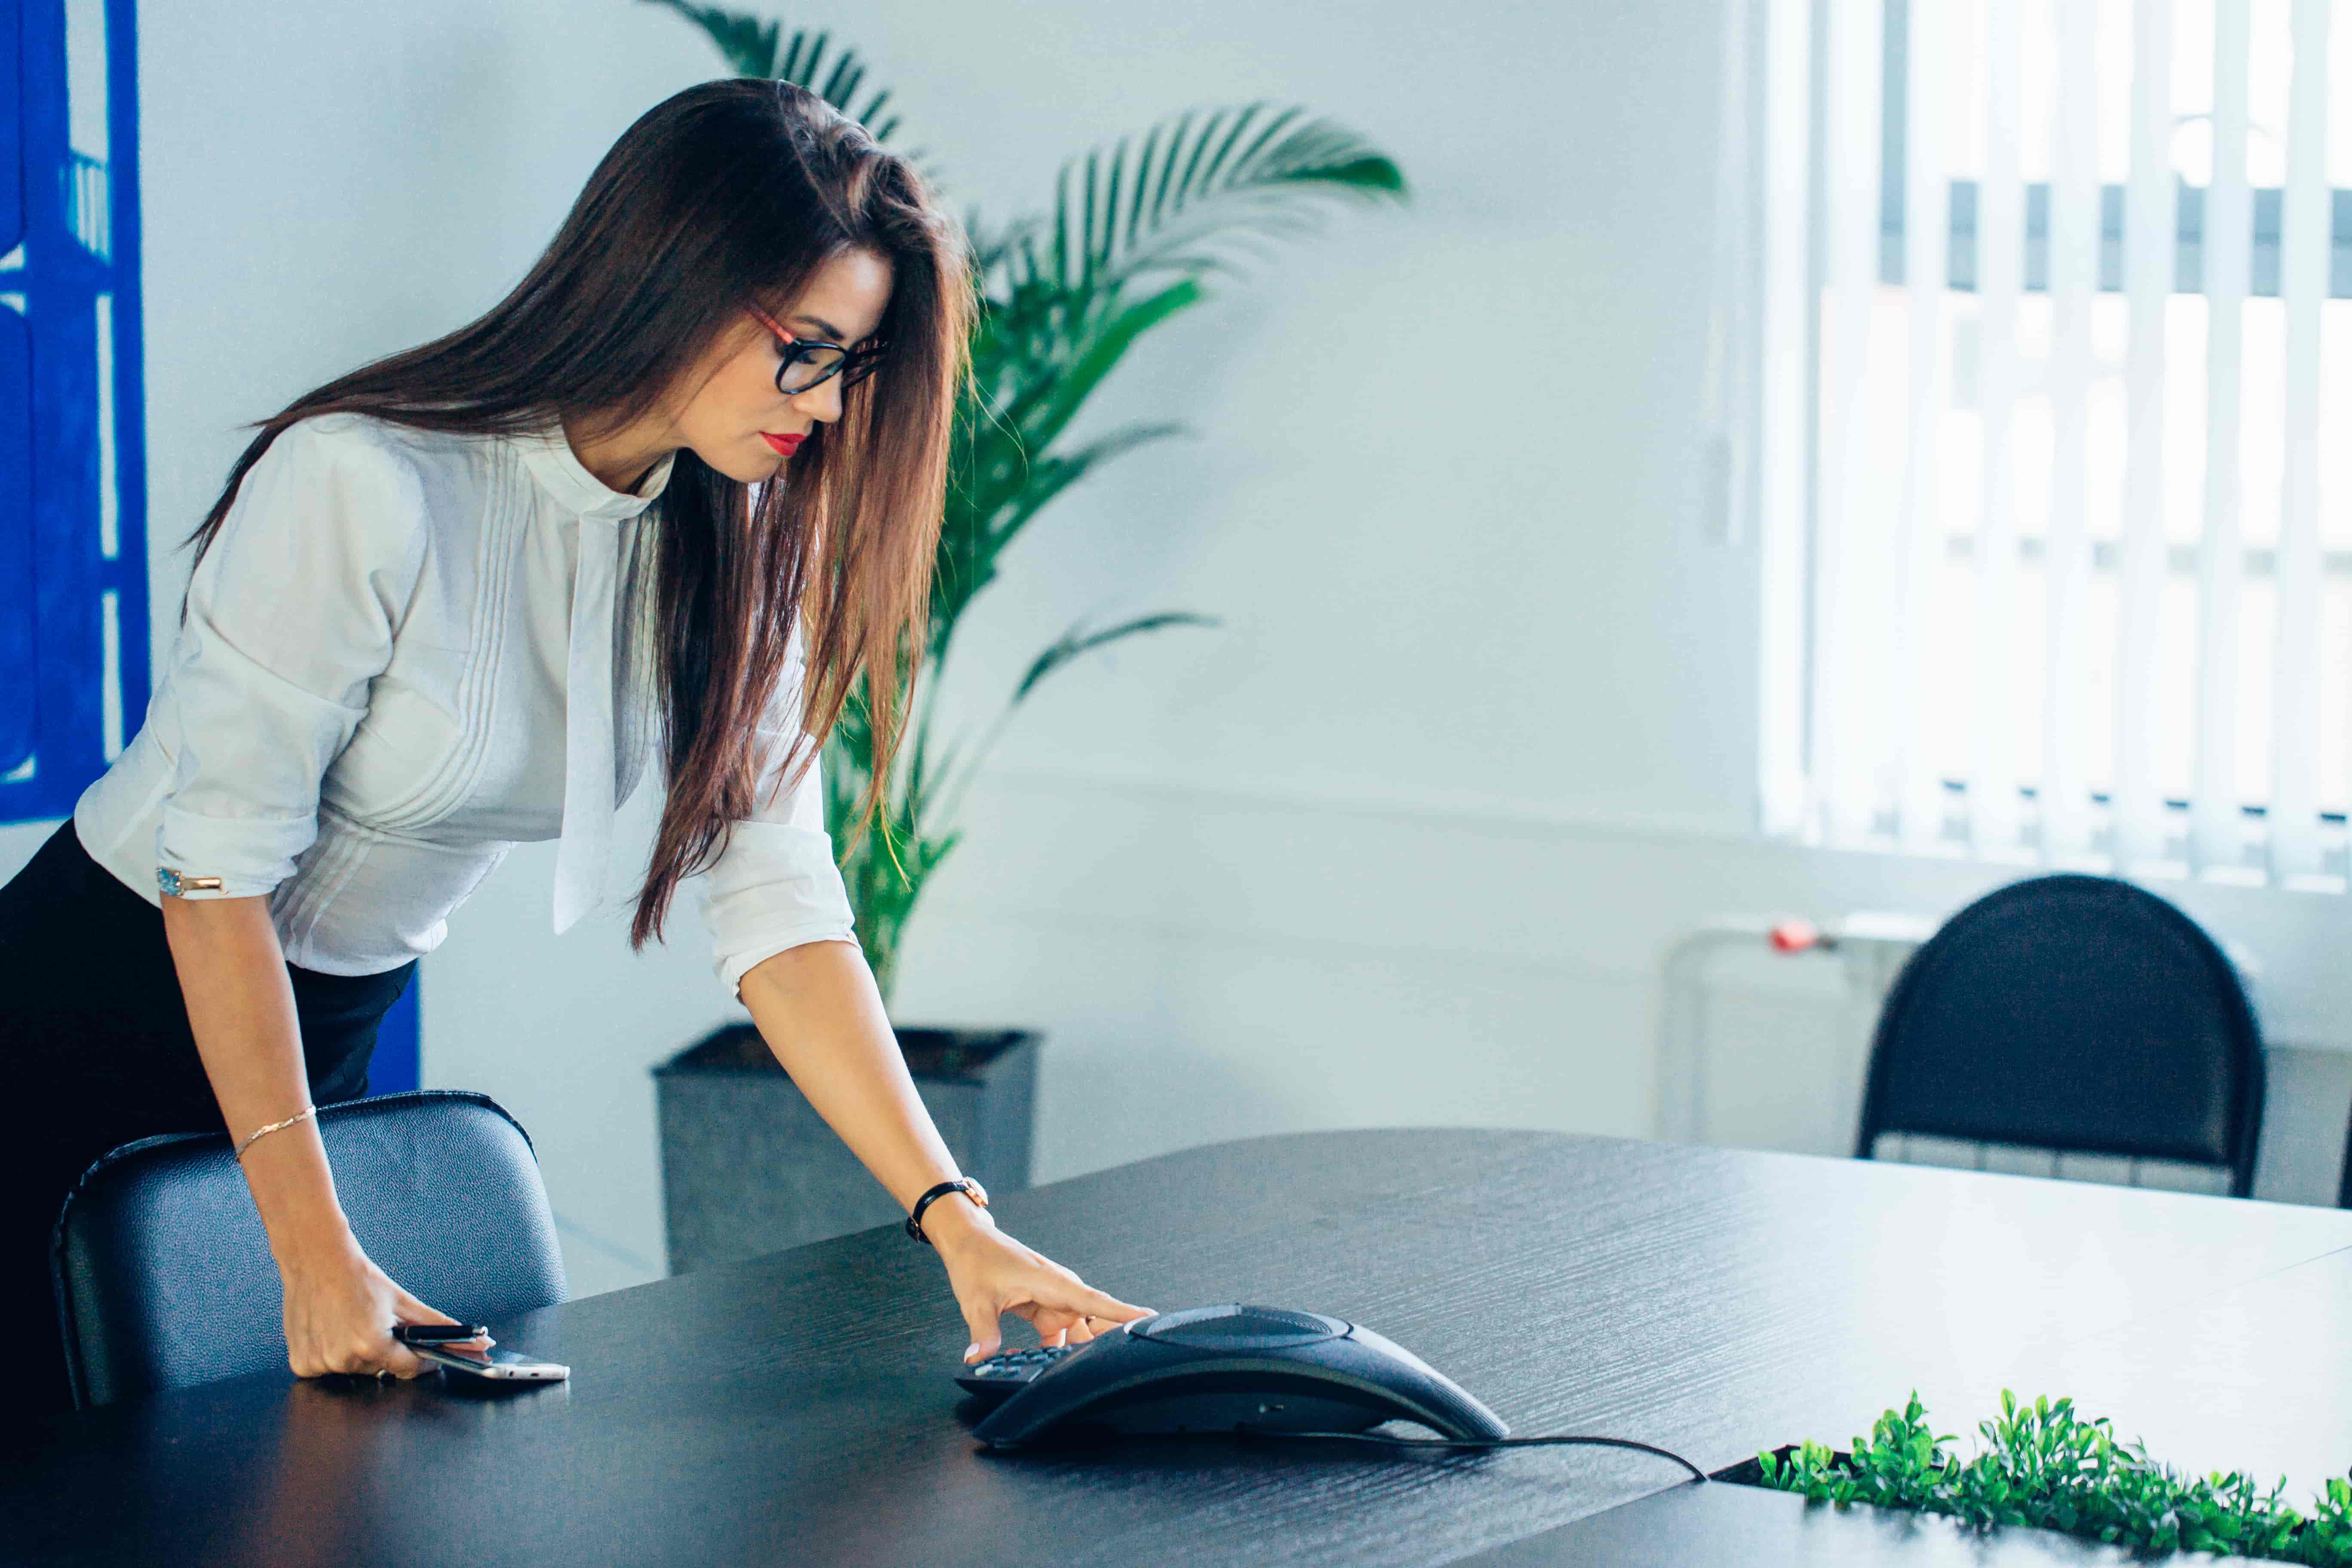 This is a photo of a lady setting up a conference phone.